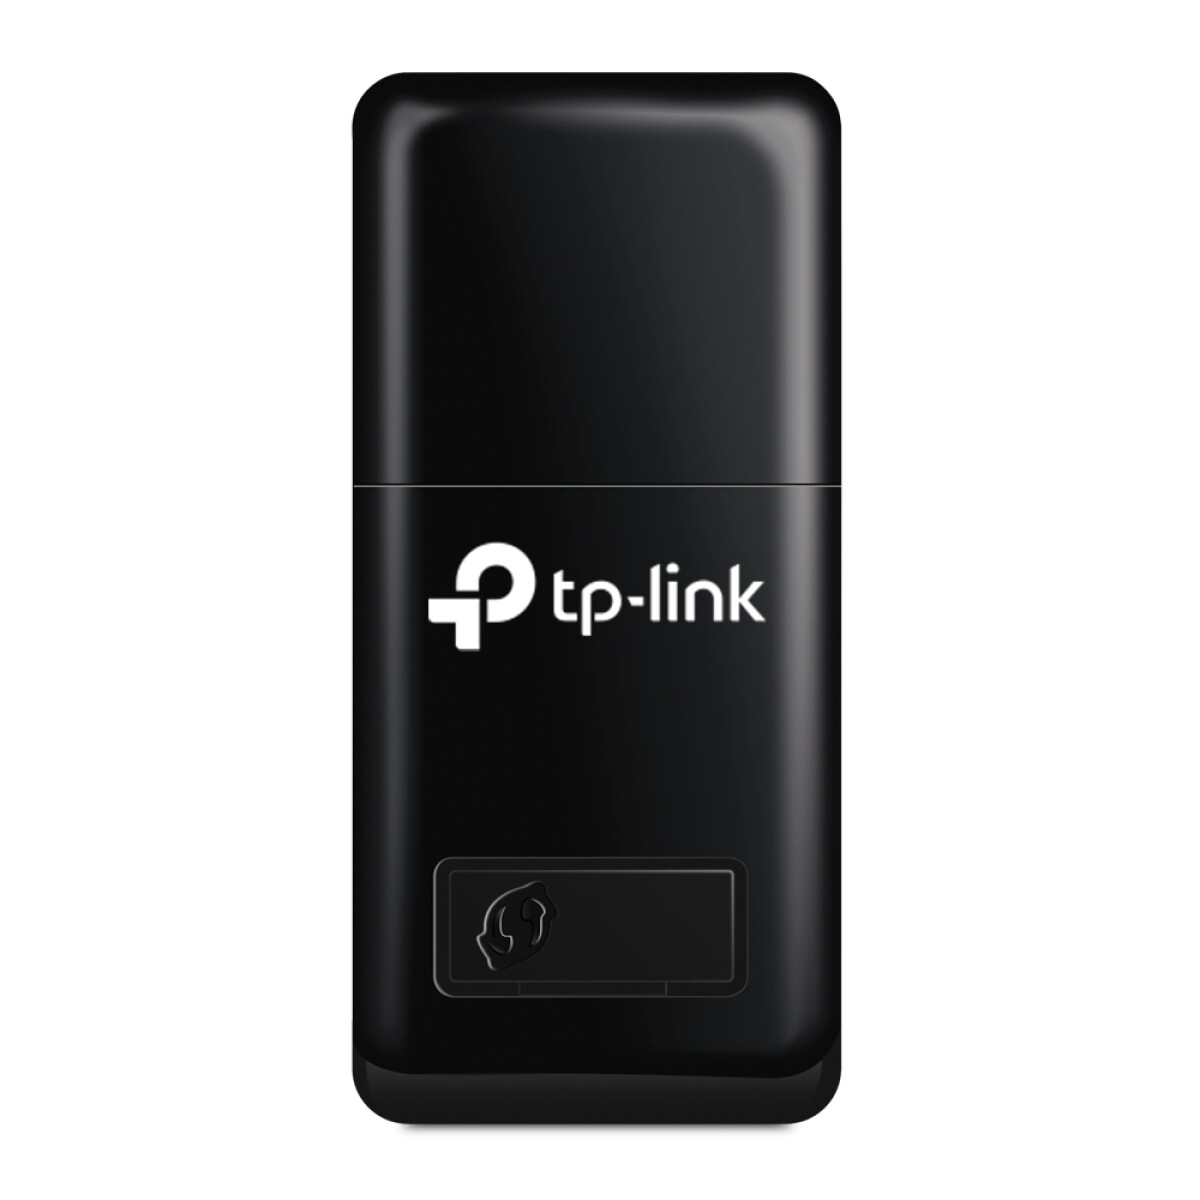 Red Inal - Adap. USB 300N TL-WN823N TP-LINK - Red Inal - Adap. Usb 300n Tl-wn823n Tp-link 